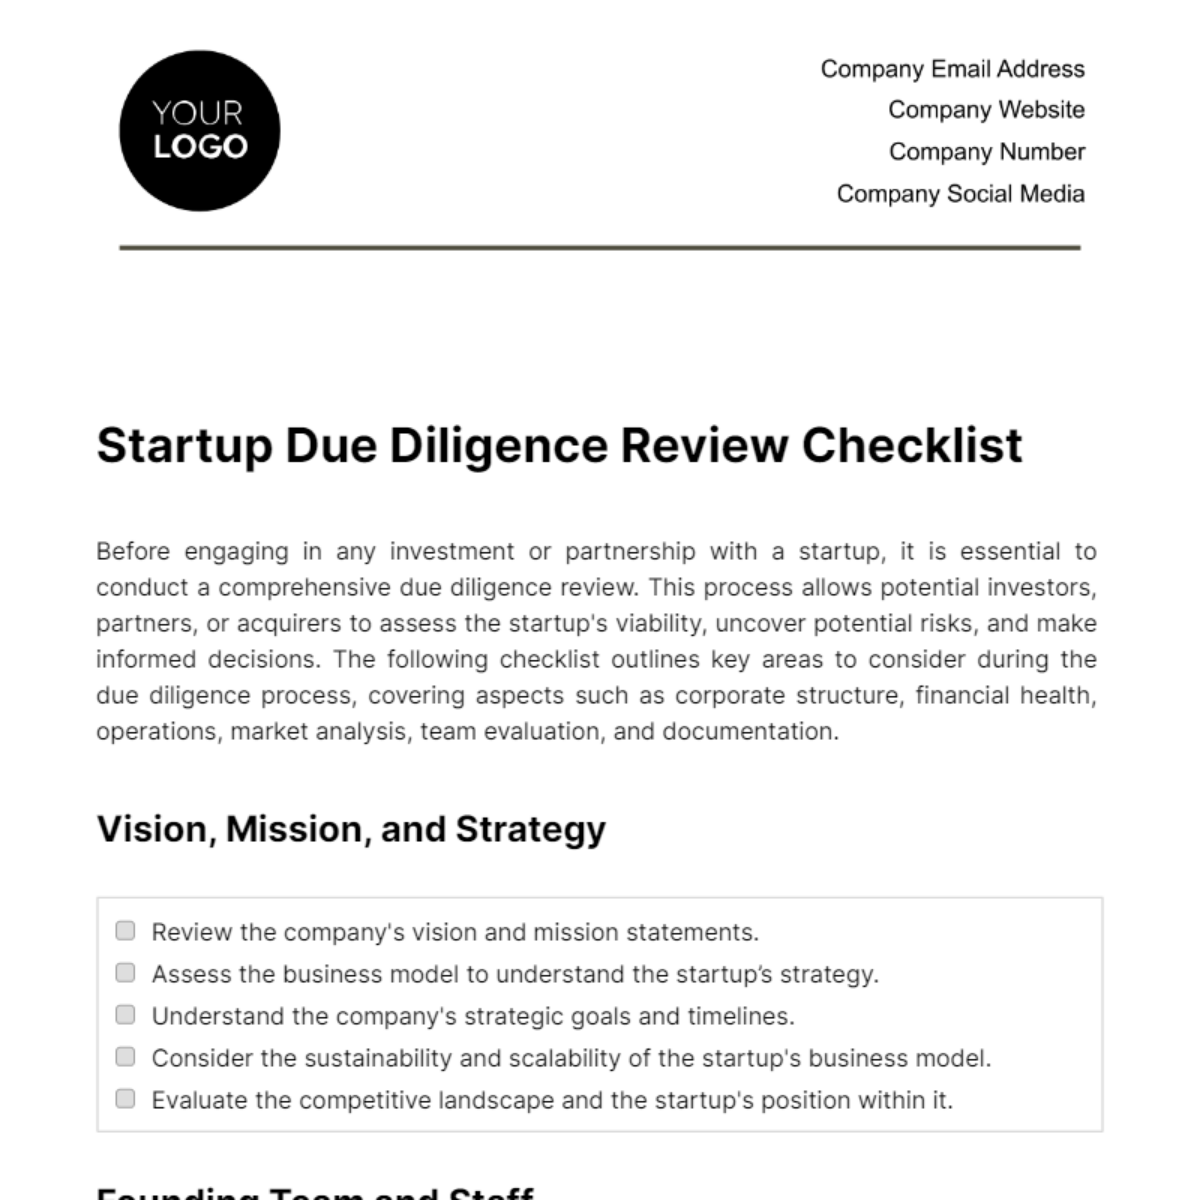 Startup Due Diligence Review Checklist Template